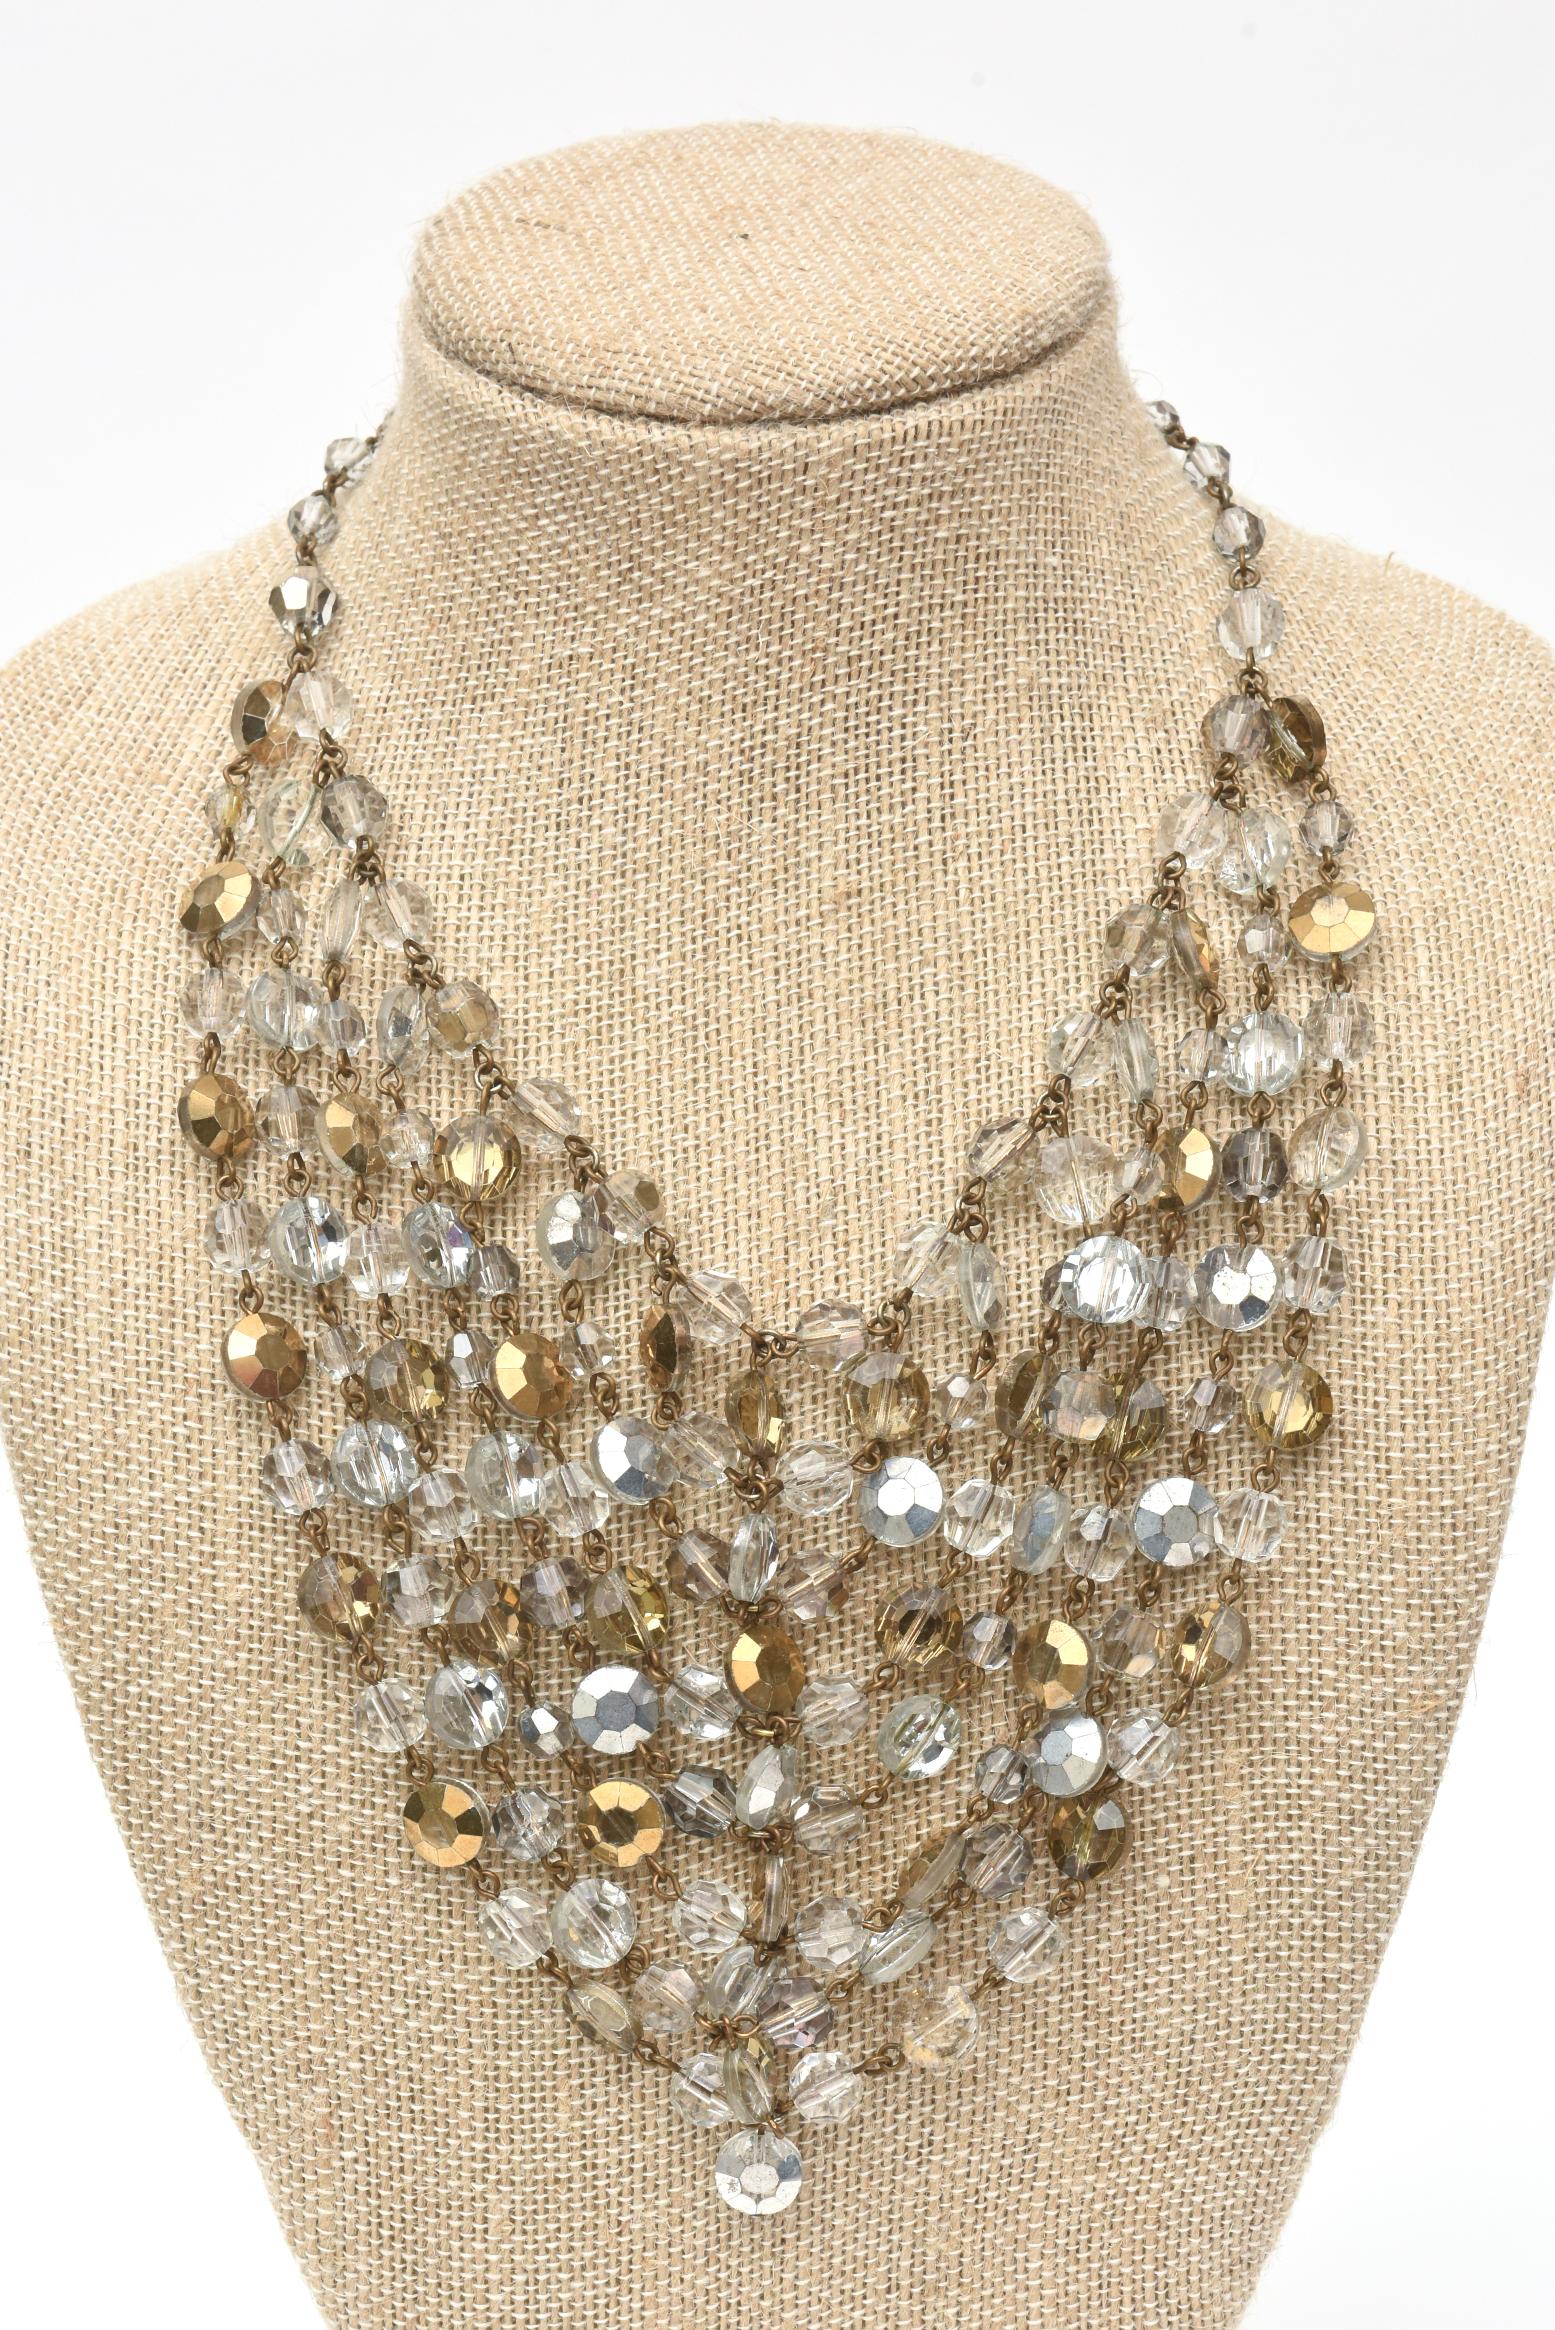 Austrian Beveled Cut Crystals Tiered Bib Necklace Vintage In Good Condition For Sale In North Miami, FL